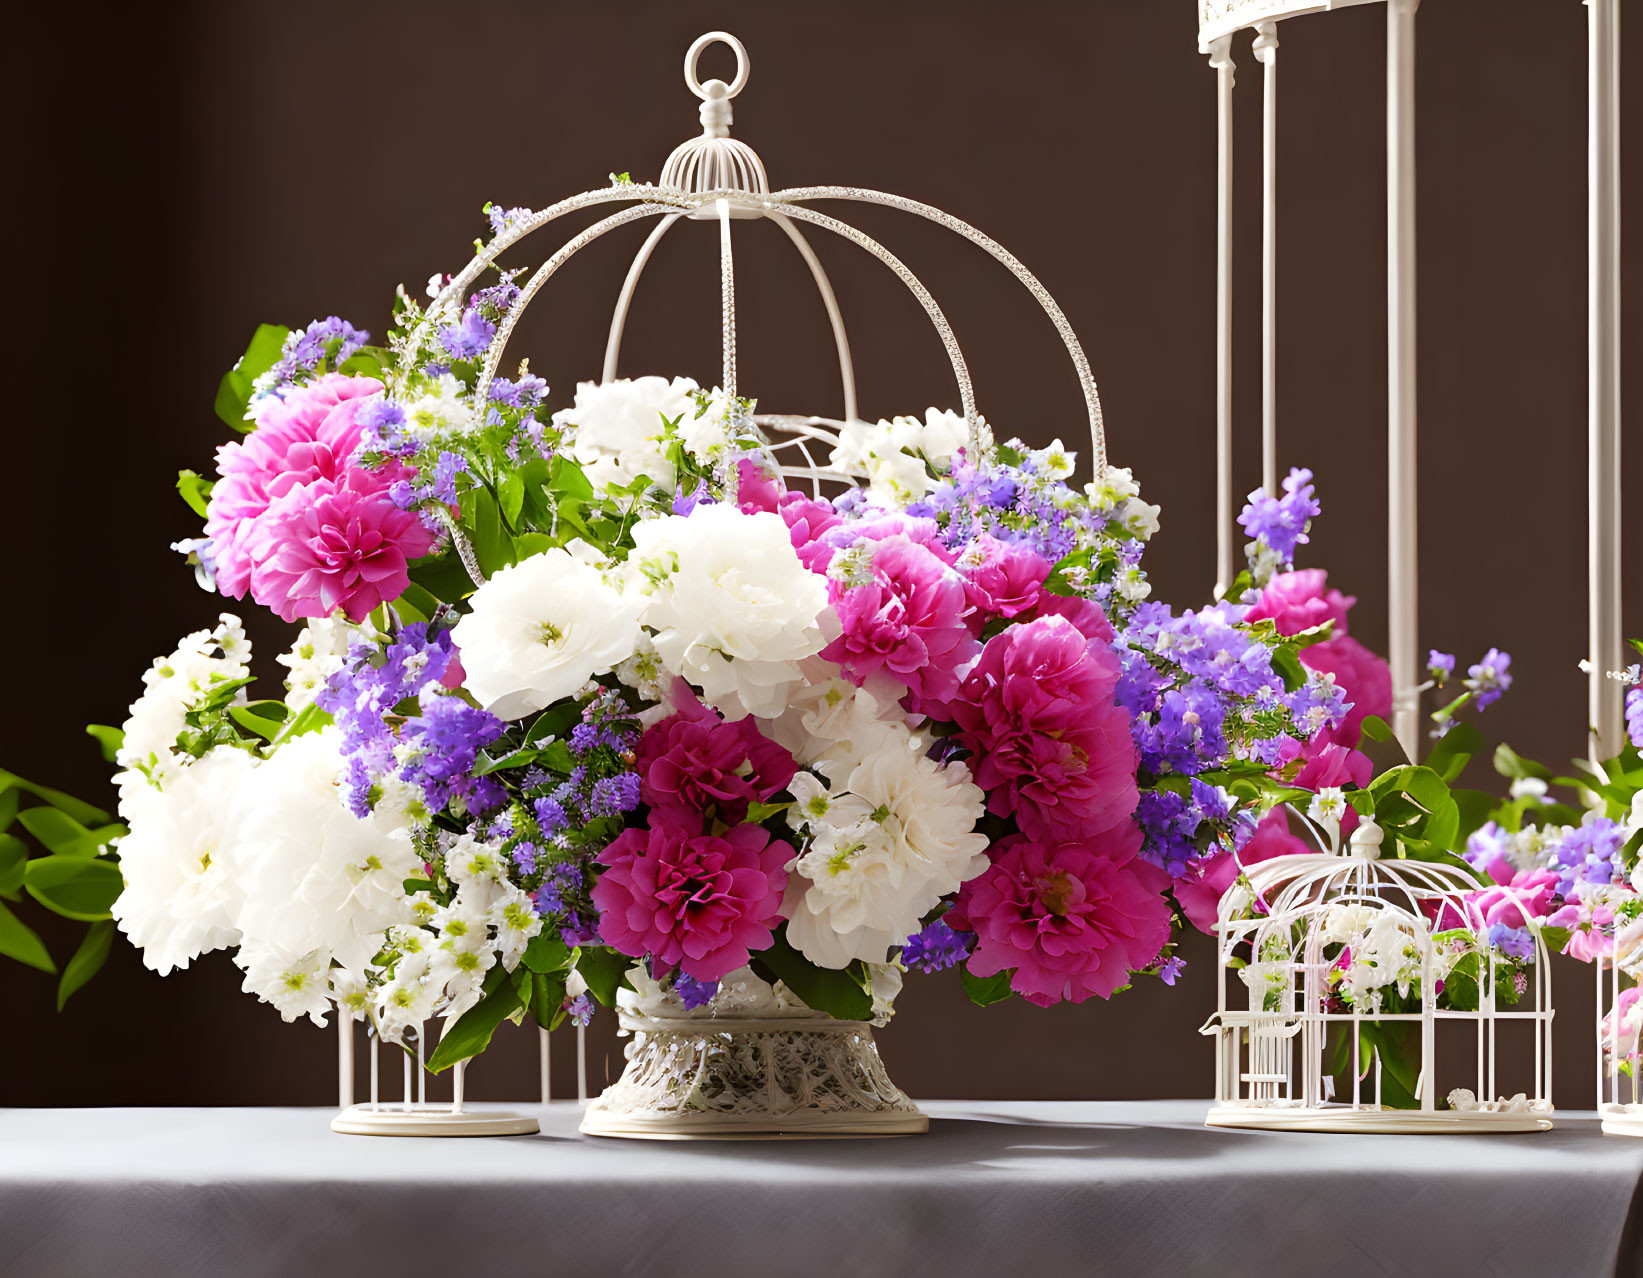 Flowers in a Bird Cage